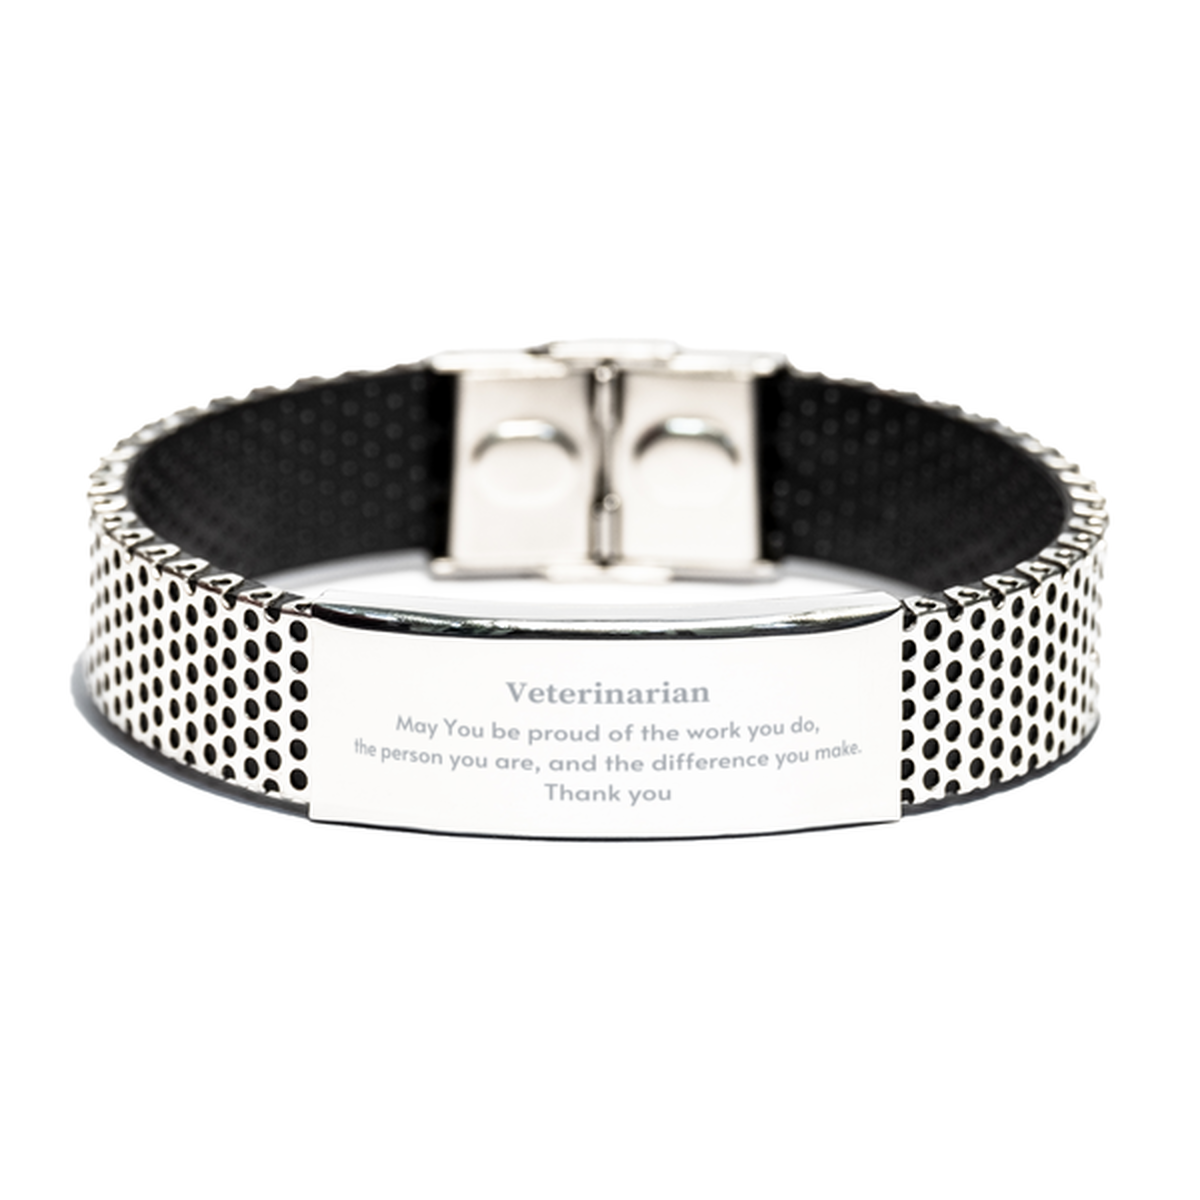 Heartwarming Stainless Steel Bracelet Retirement Coworkers Gifts for Veterinarian, Veterinarian May You be proud of the work you do, the person you are Gifts for Boss Men Women Friends